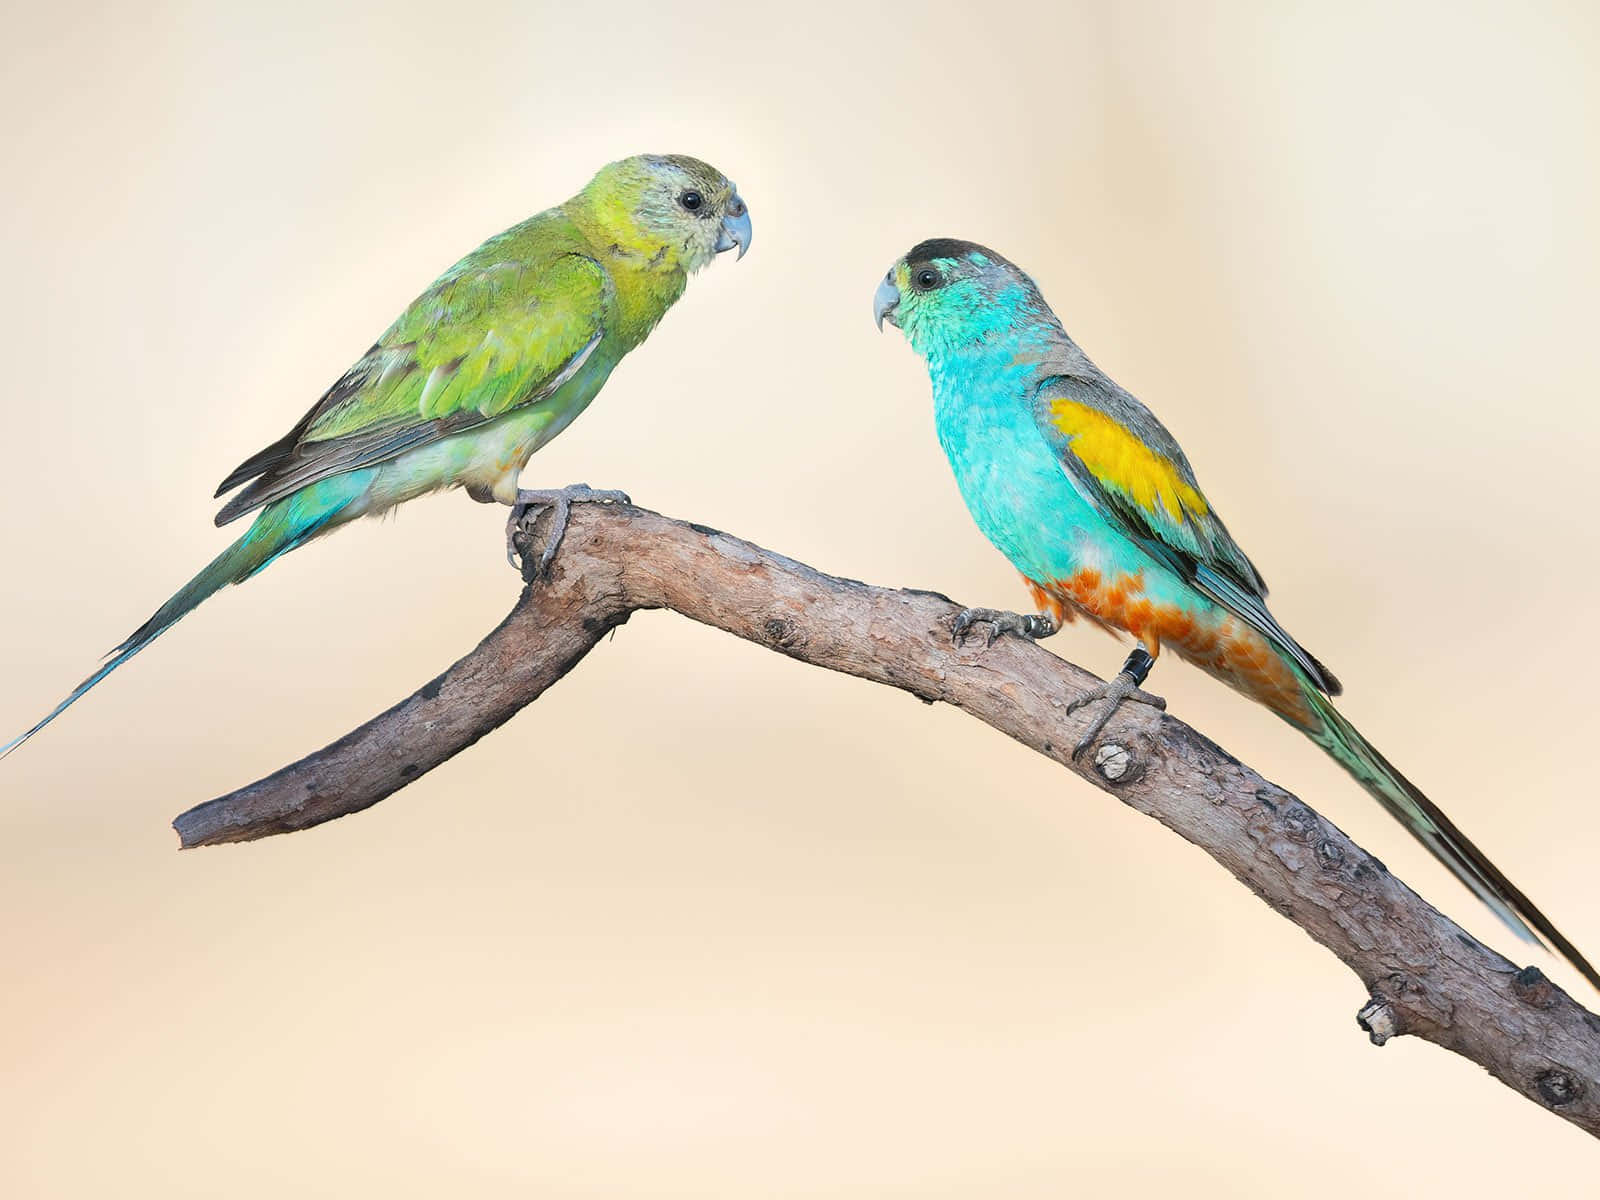 Two Parrots Sitting On A Branch